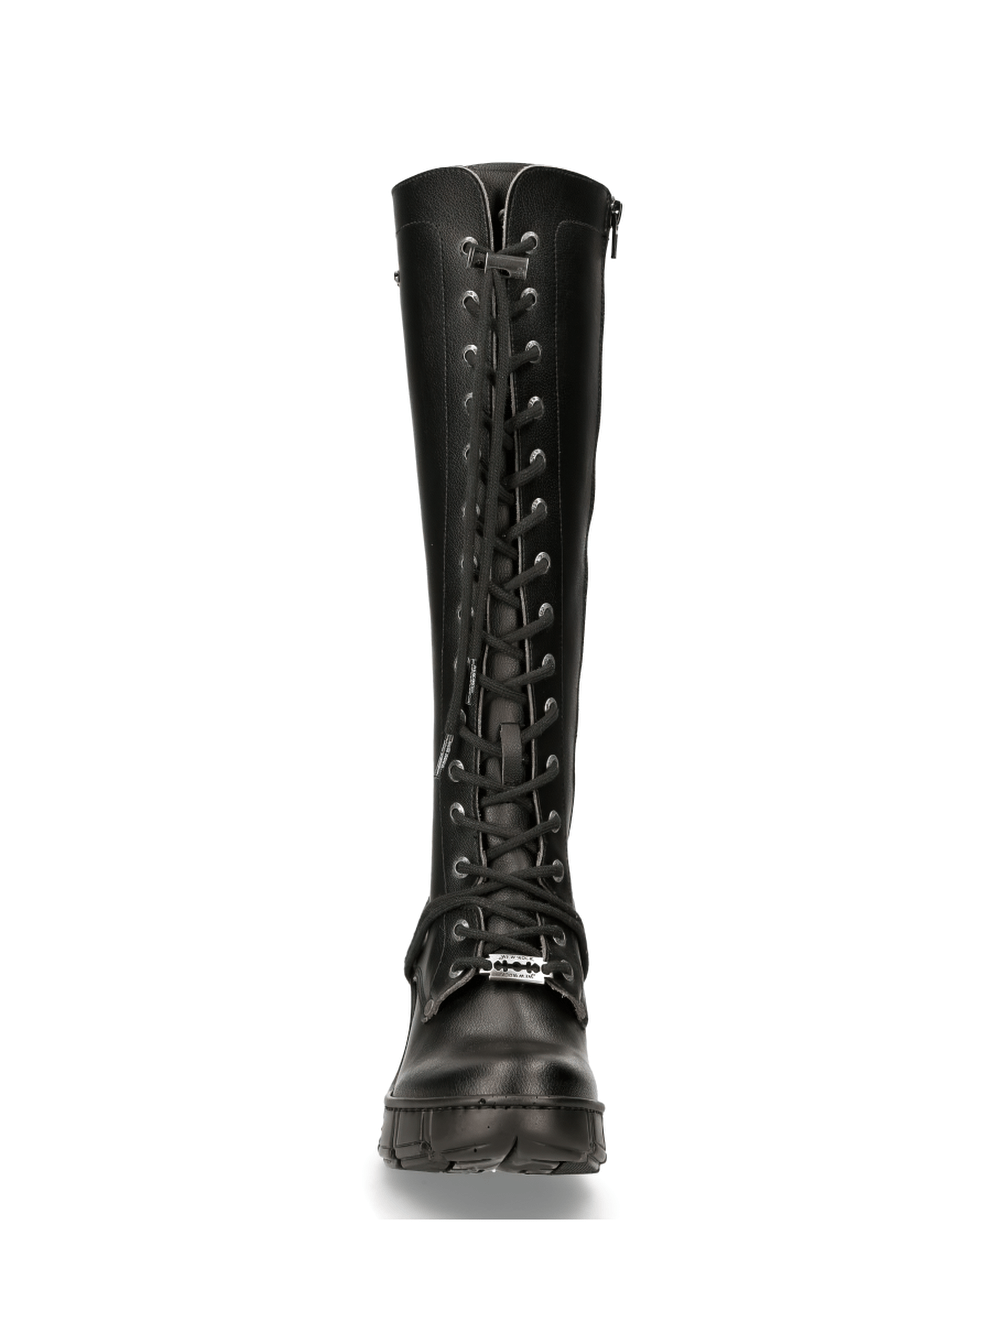 NEW ROCK Black Lace-Up Gothic Knee High Boots